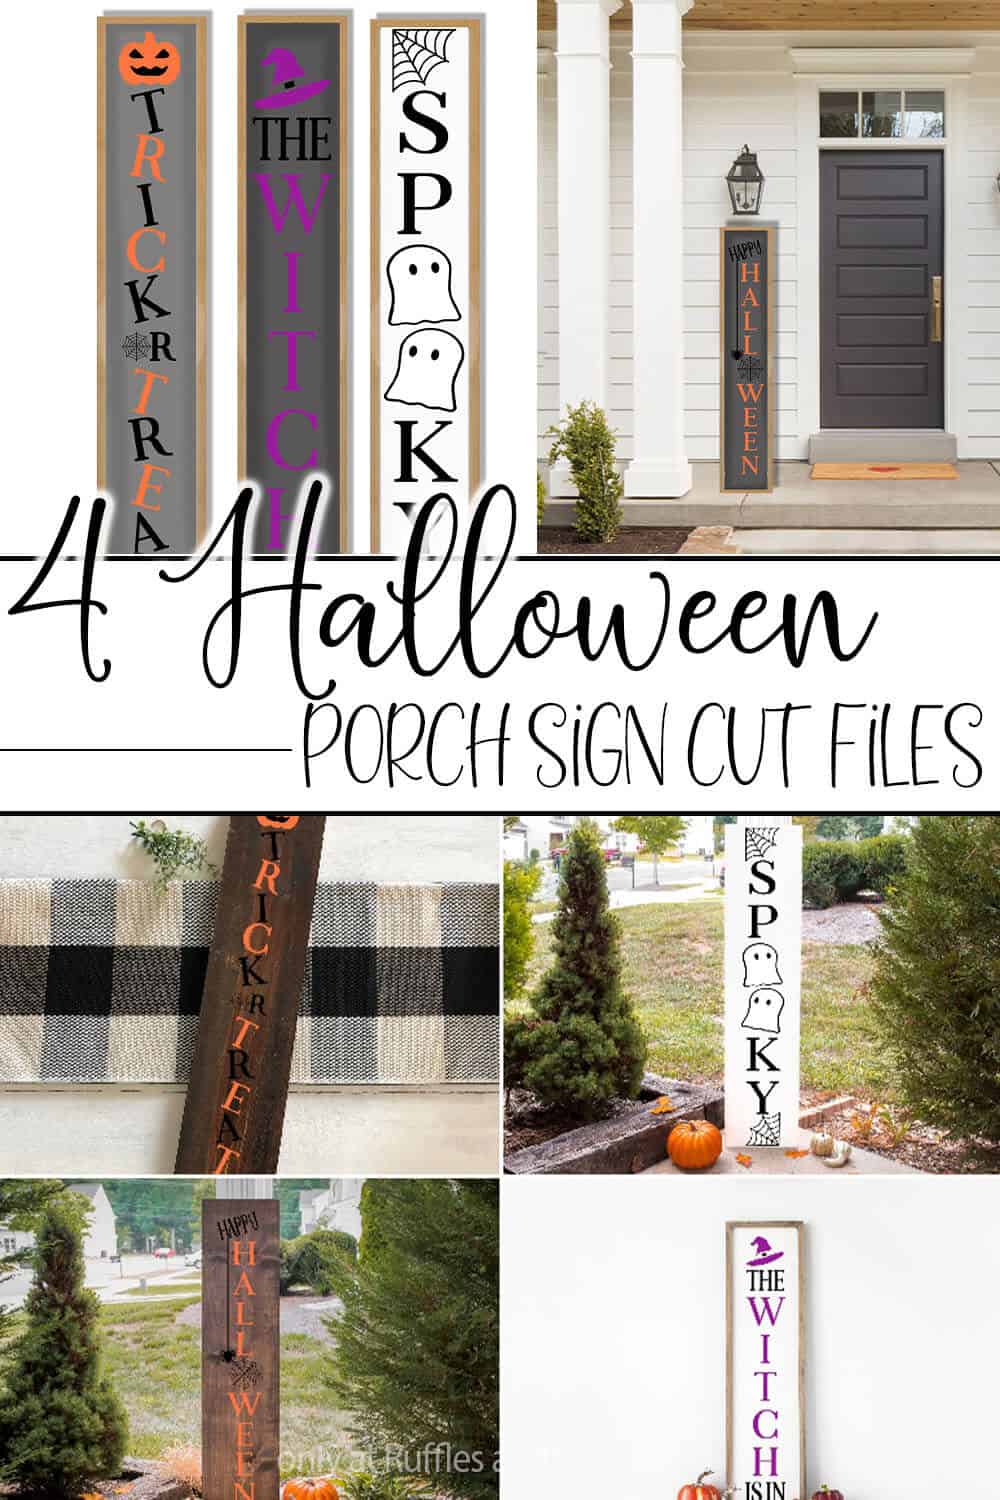 Vertical photo collage of of cut files for vertical porch signs for Halloween with text which reads 4 halloween porch sign cut files. 